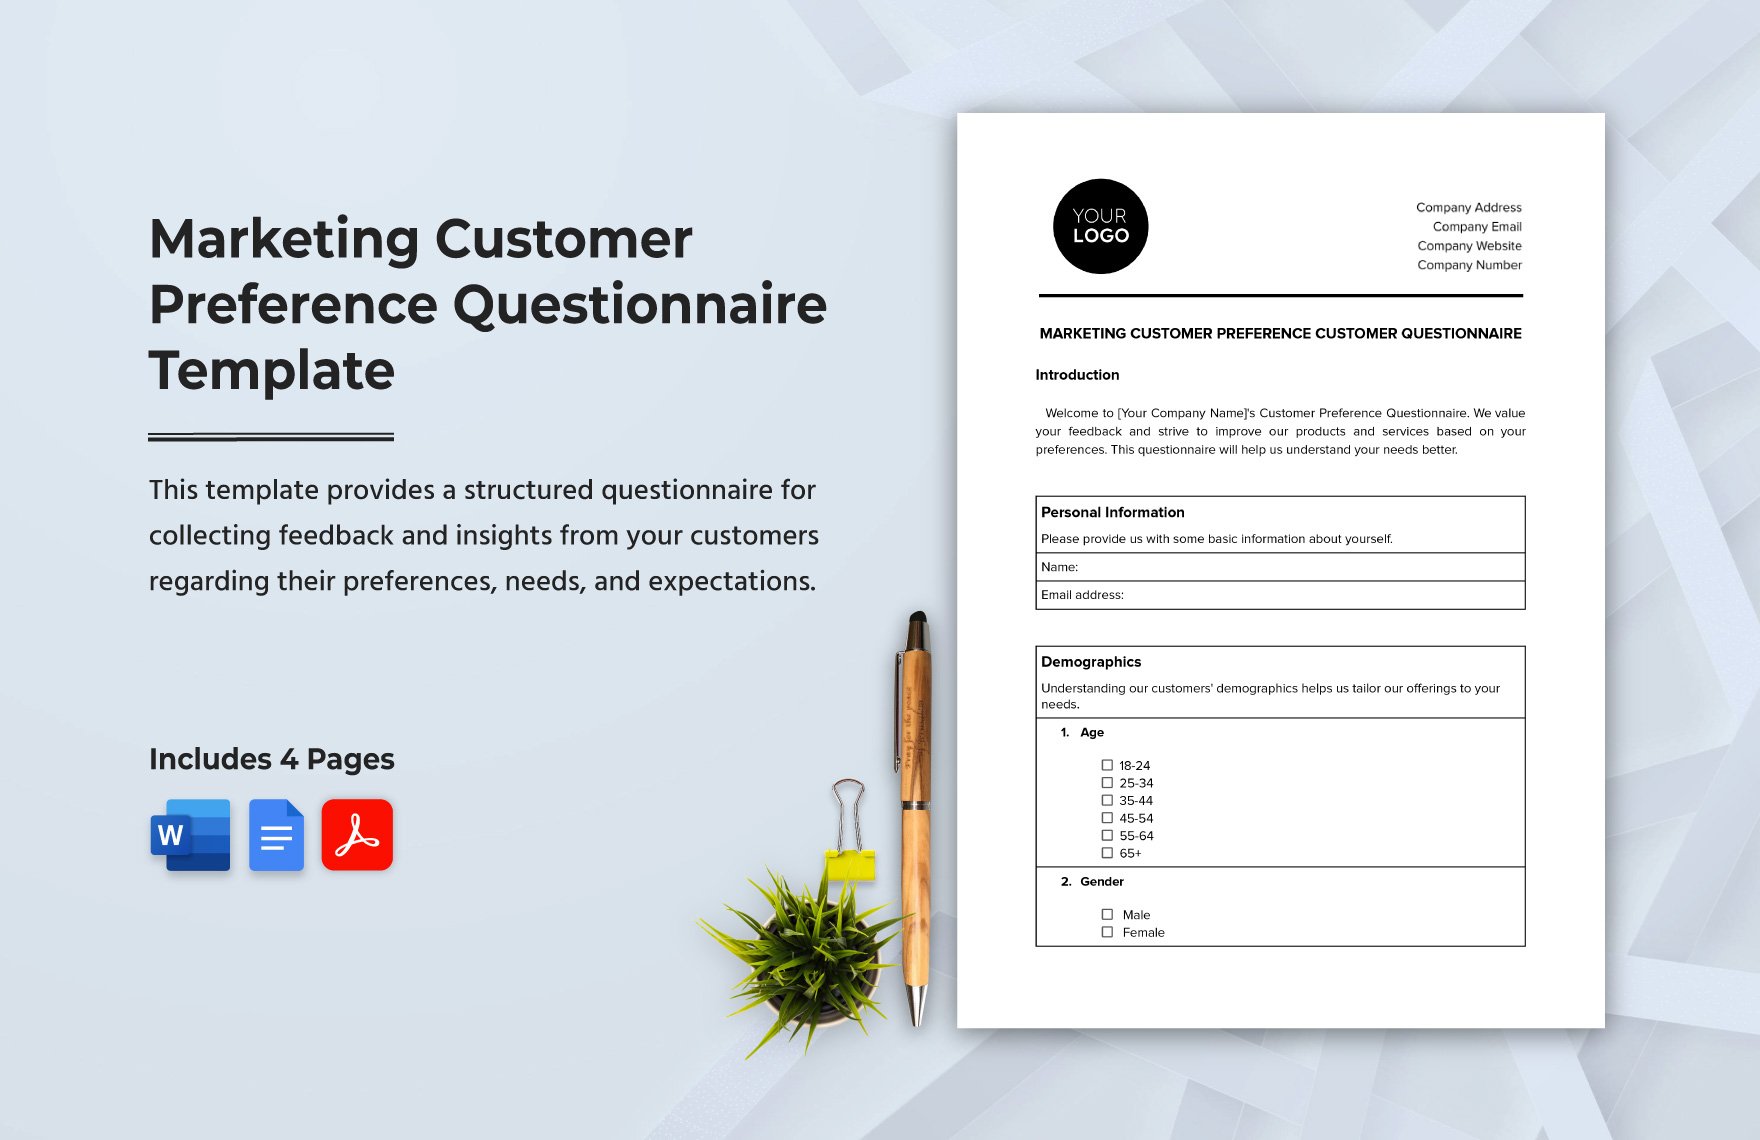 Marketing Customer Preference Questionnaire Template in Word, Google Docs, PDF